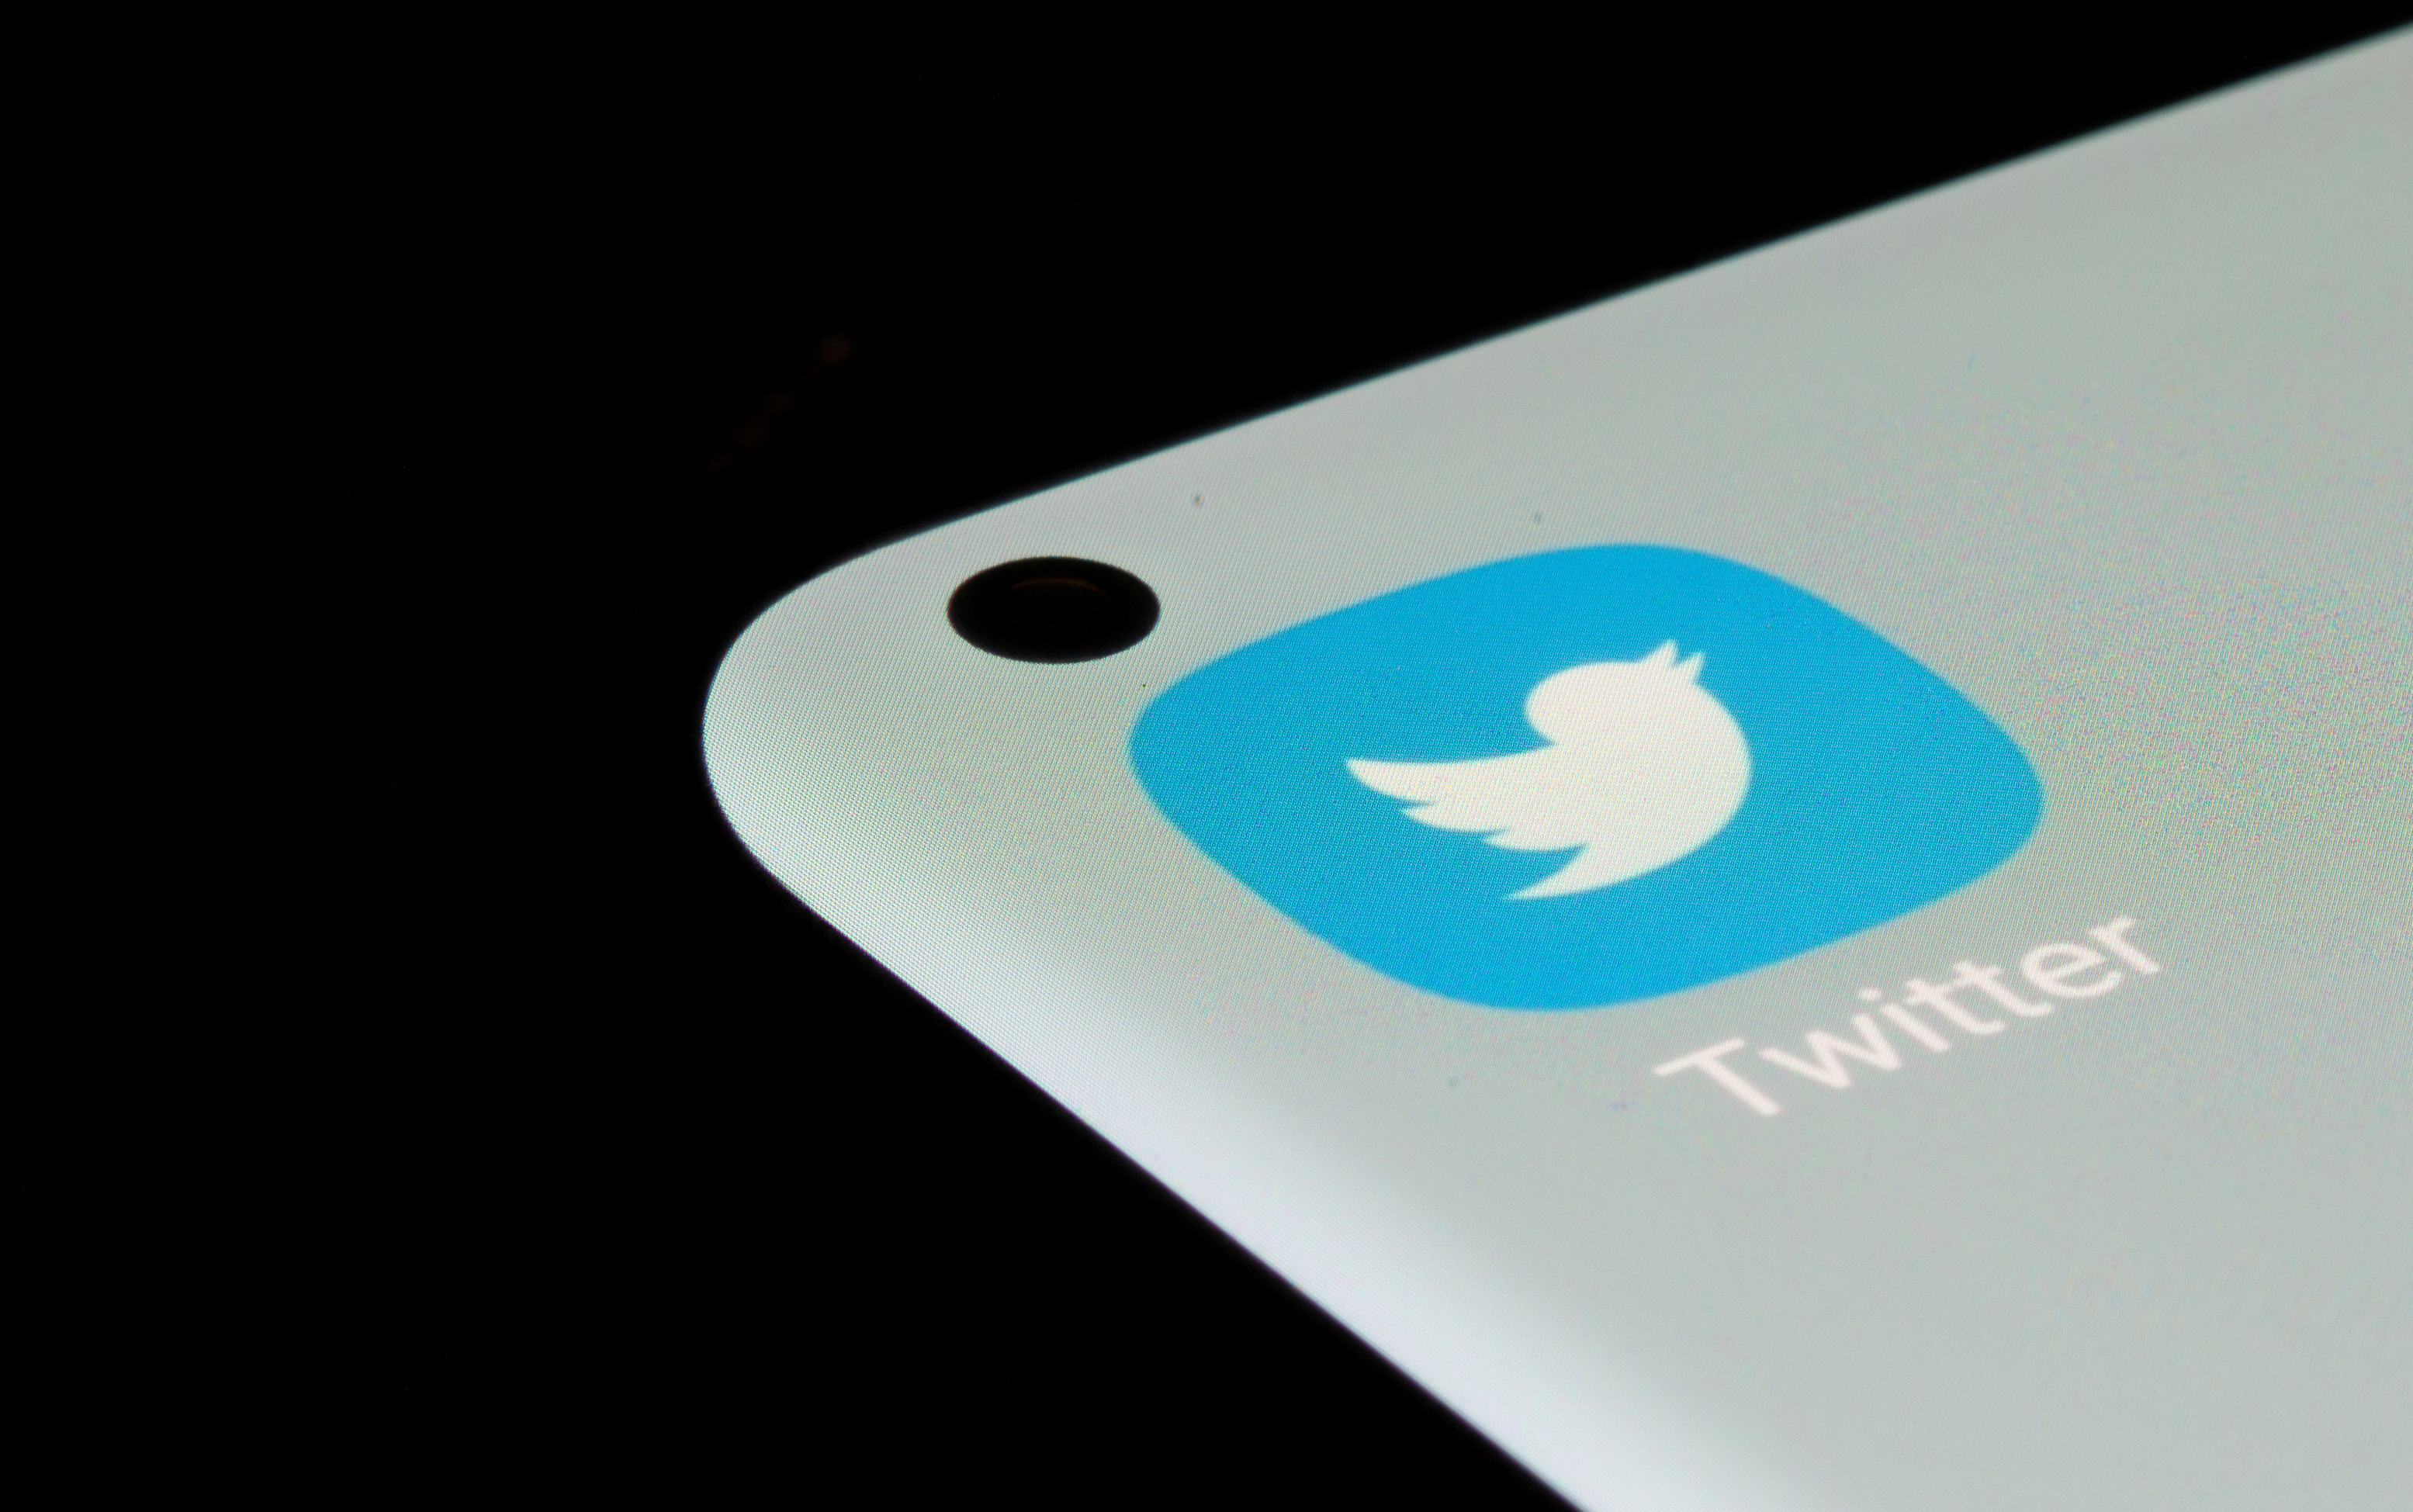 Twitter removed a lot more abusive content in the second half of 2020 than ever before